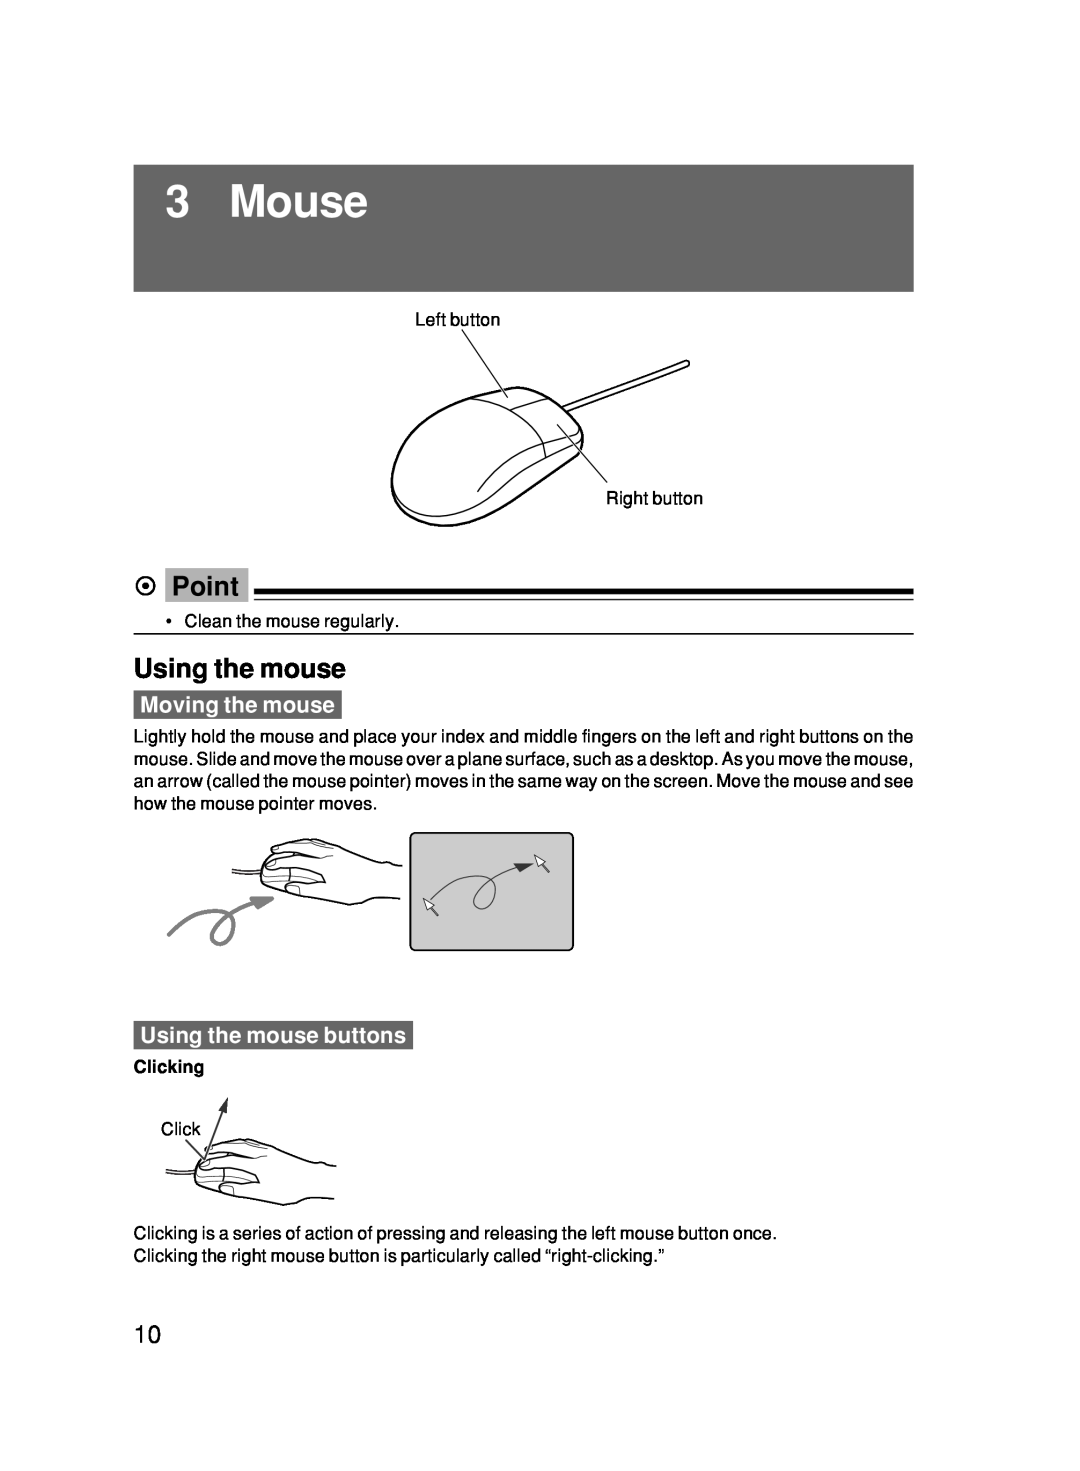 Fujitsu 500 user manual Mouse, Moving the mouse, Using the mouse buttons, Clicking, Point 